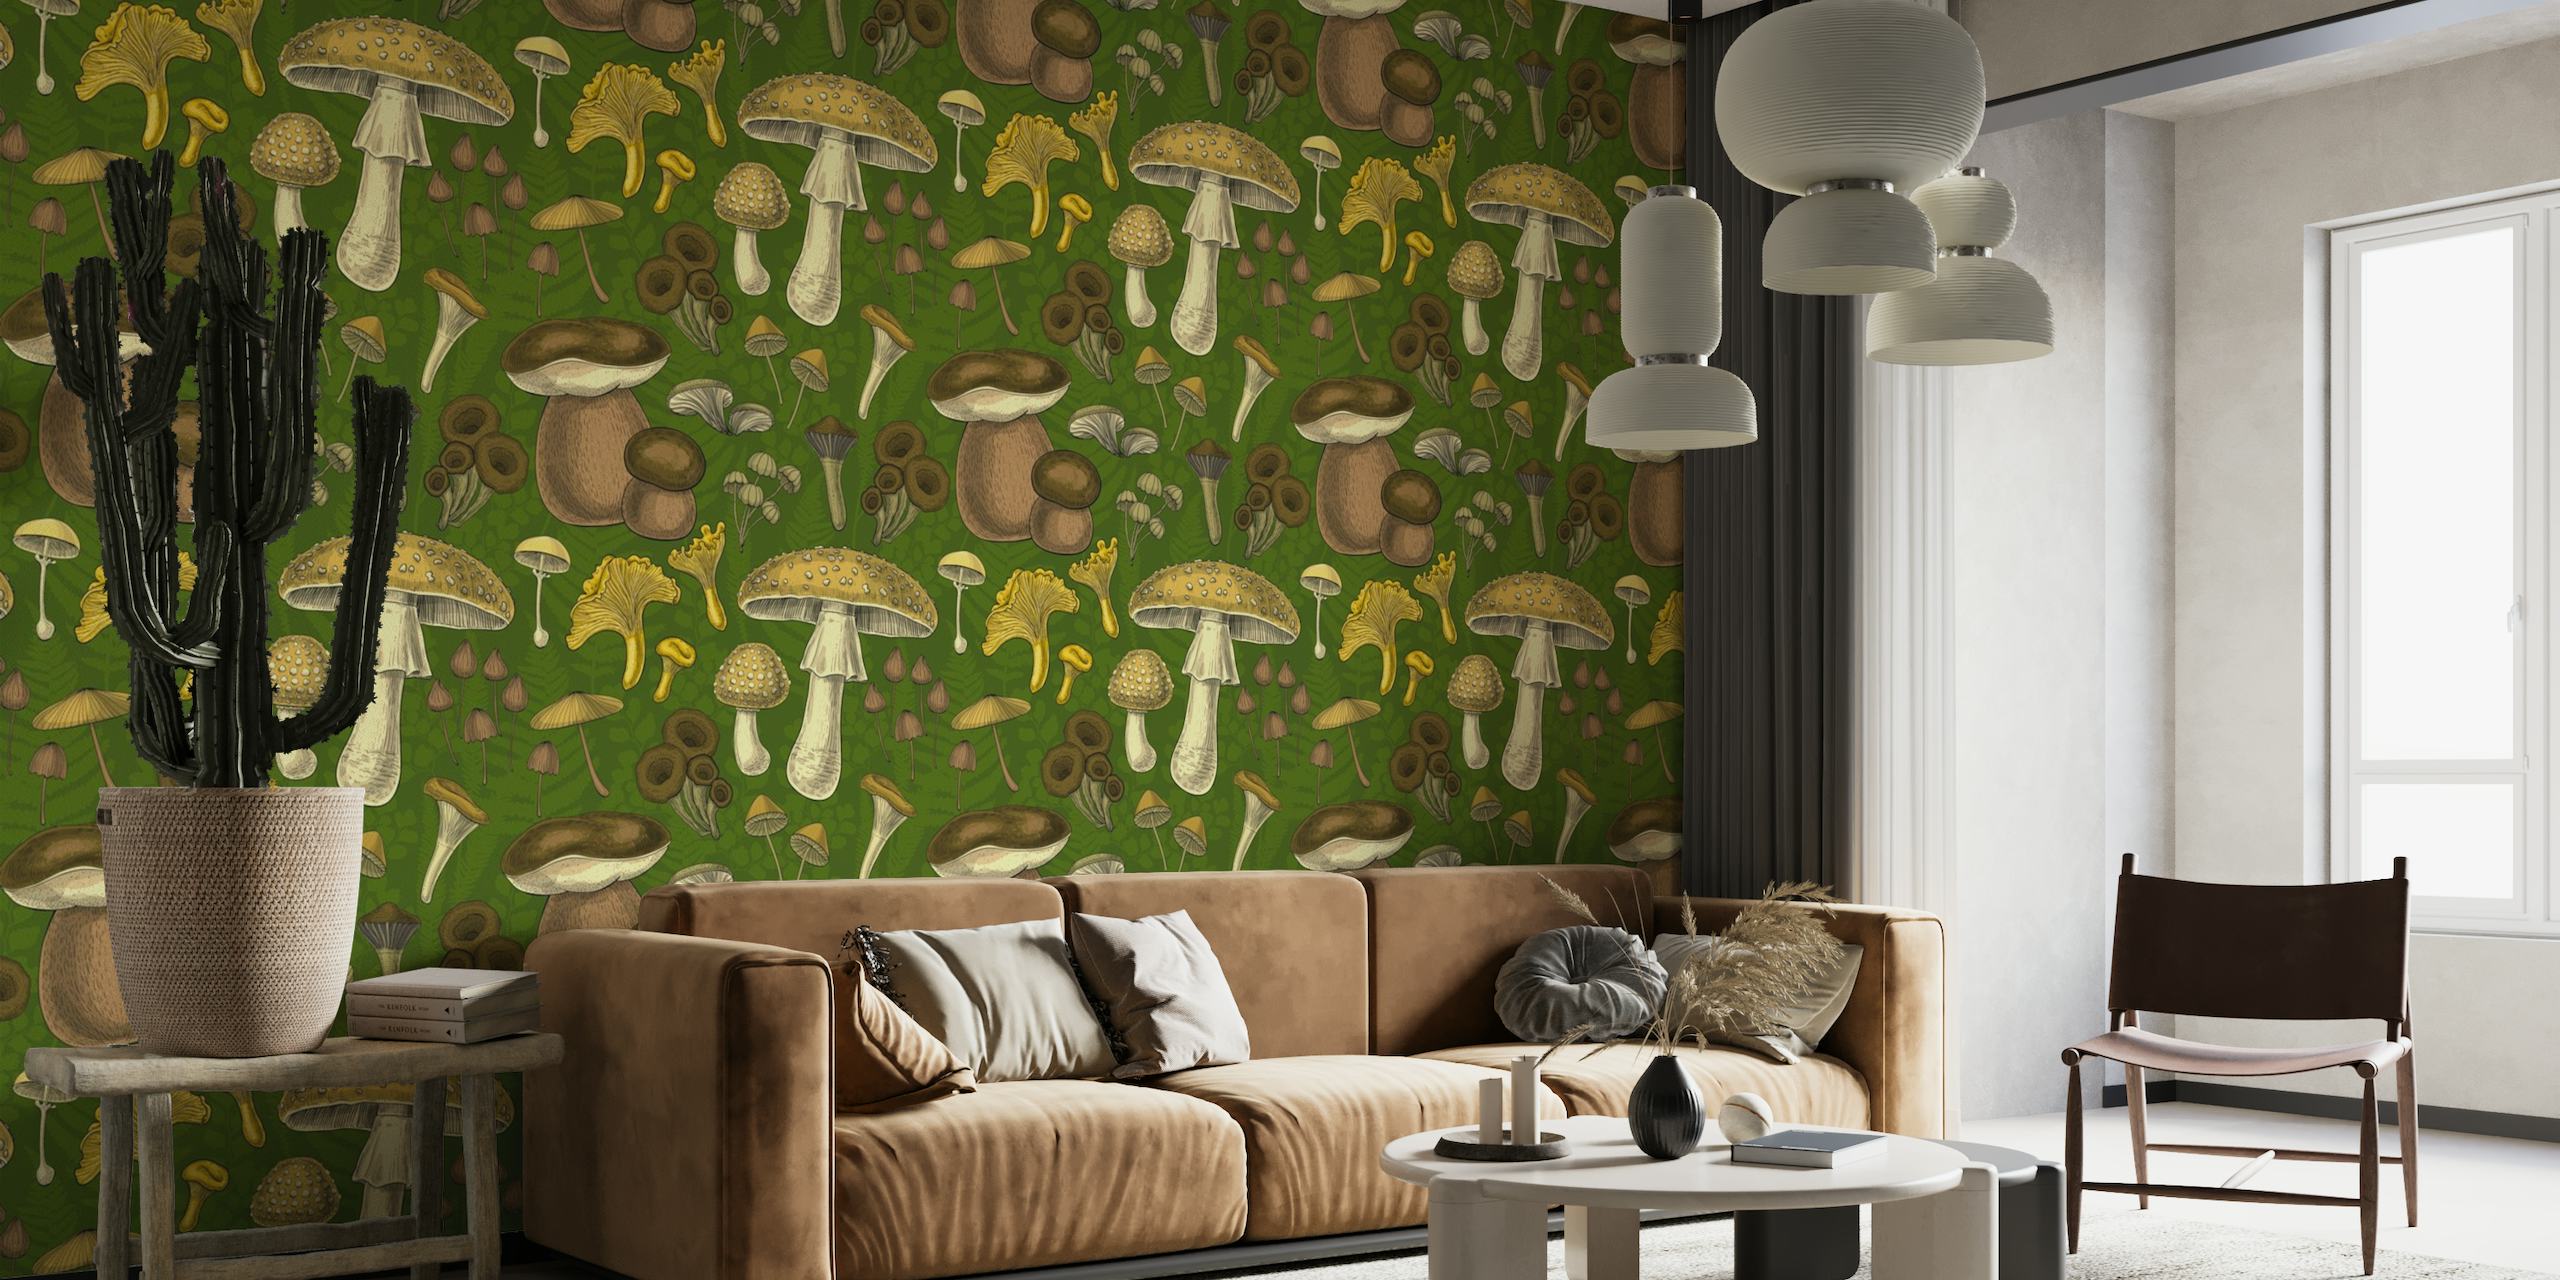 Illustrative wall mural with a variety of wild mushrooms on a green background